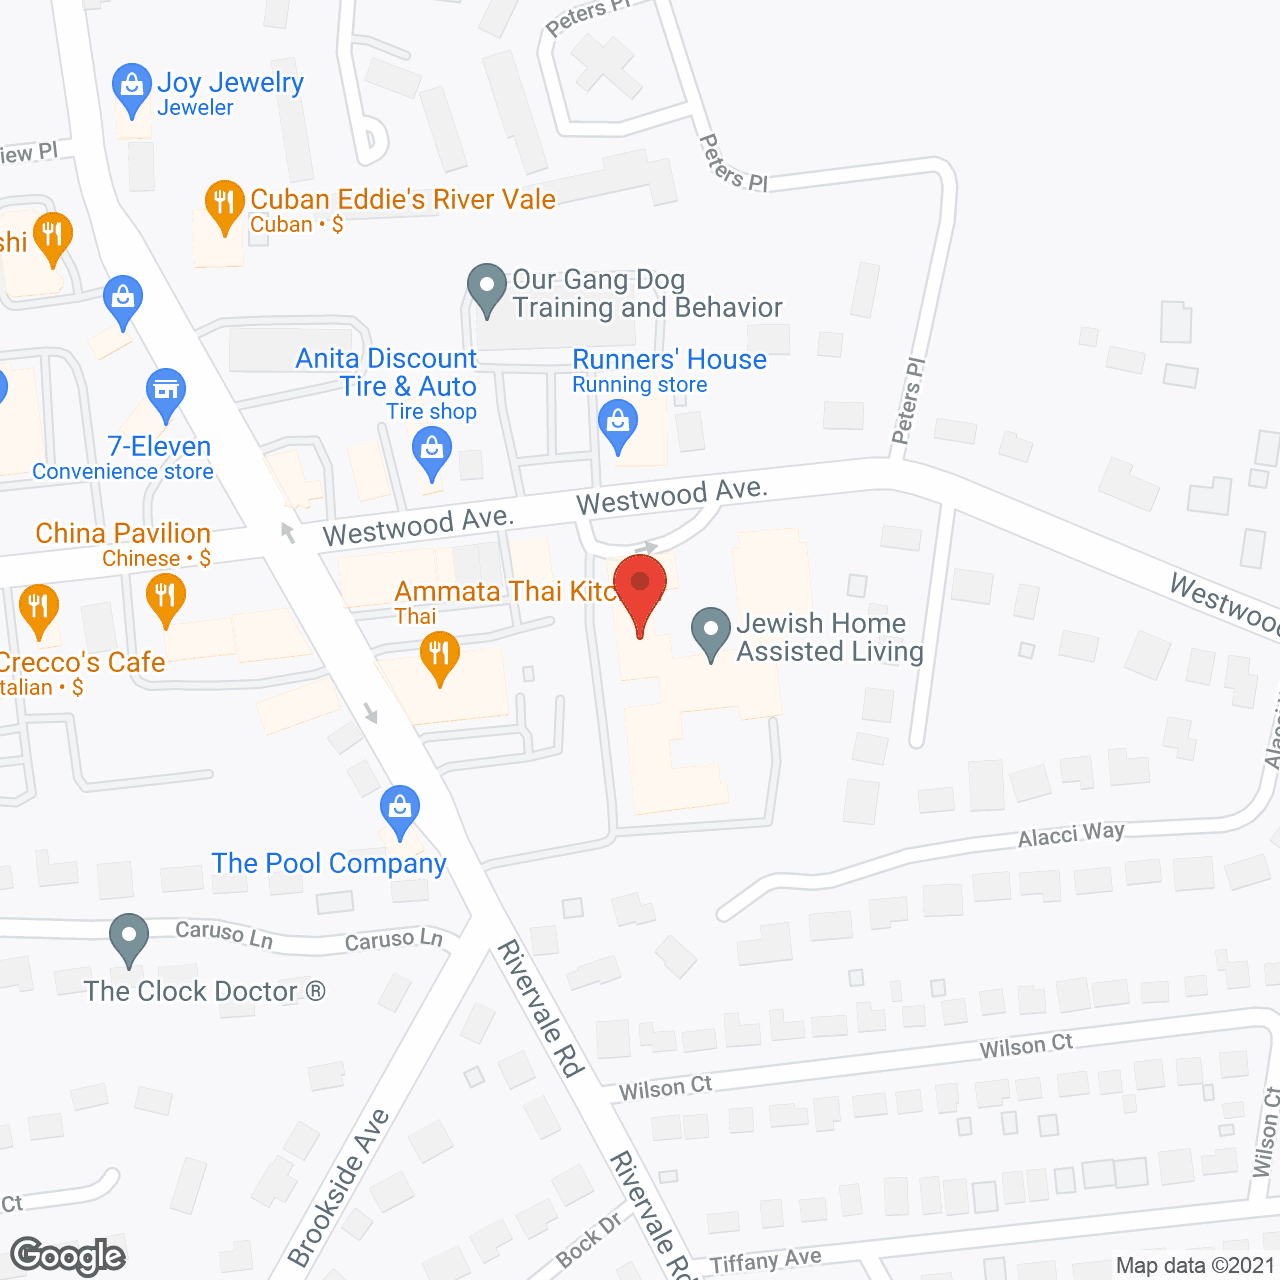 Jewish Home Assisted Living in google map